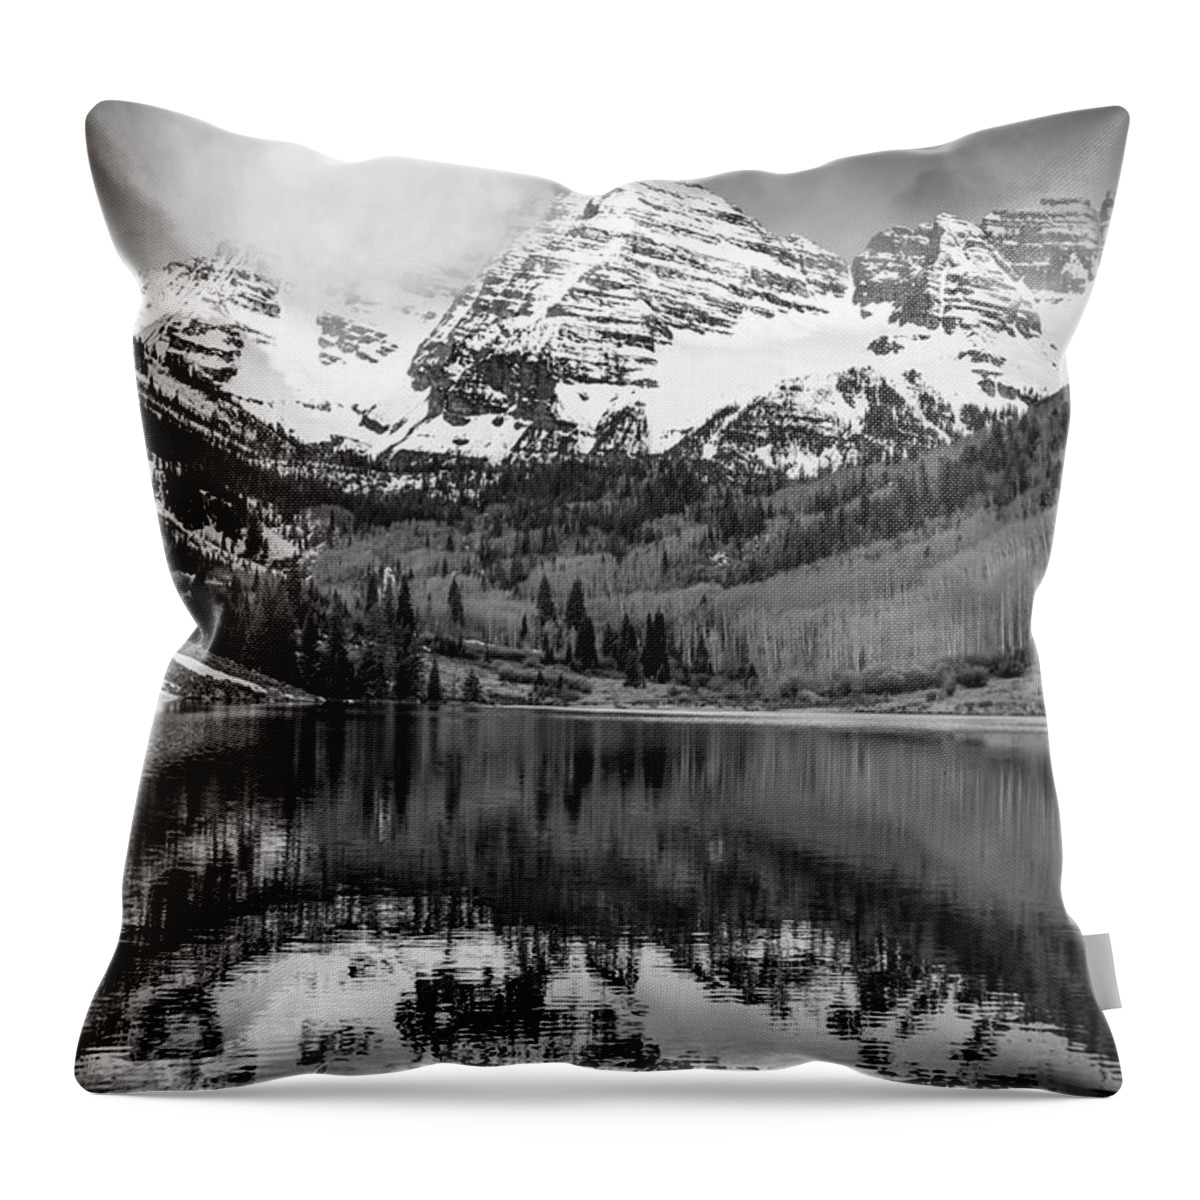 Aspen Colorado Throw Pillow featuring the photograph Snow Capped Mountain Peaks - Maroon Bells in Monochrome by Gregory Ballos